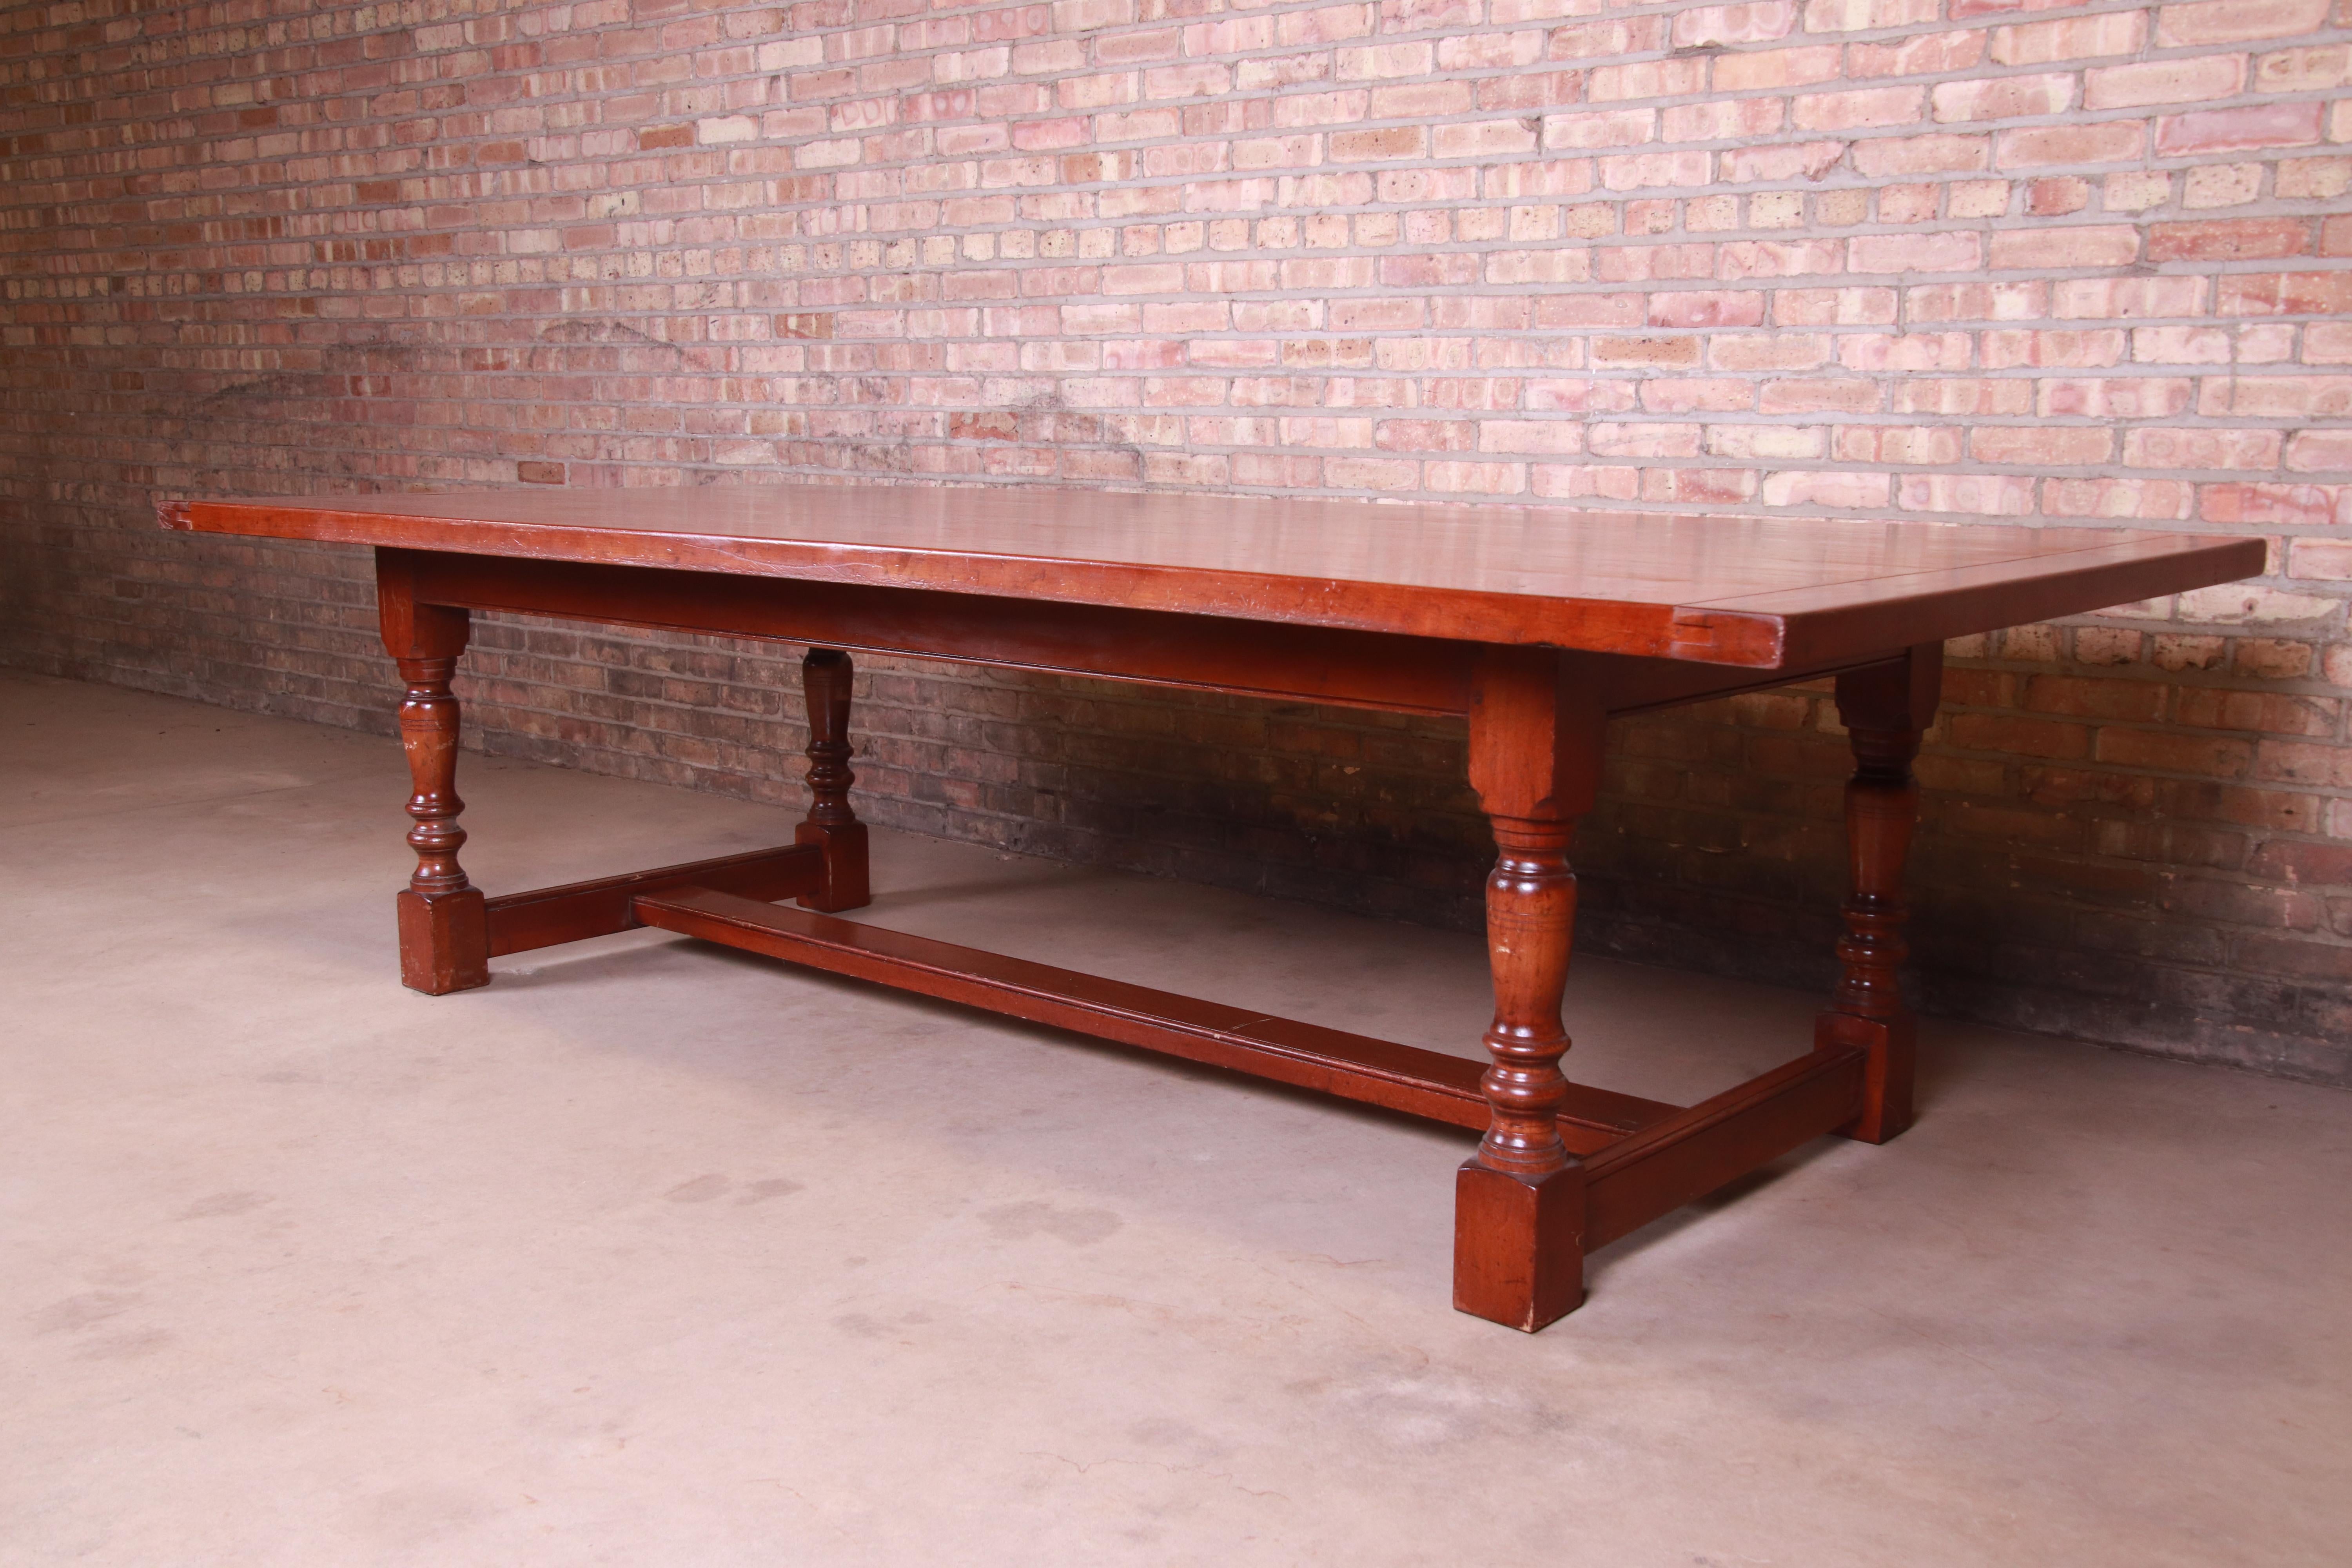 Rustic Antique English Cherry Wood Farmhouse Refectory Dining Table, Circa 1890